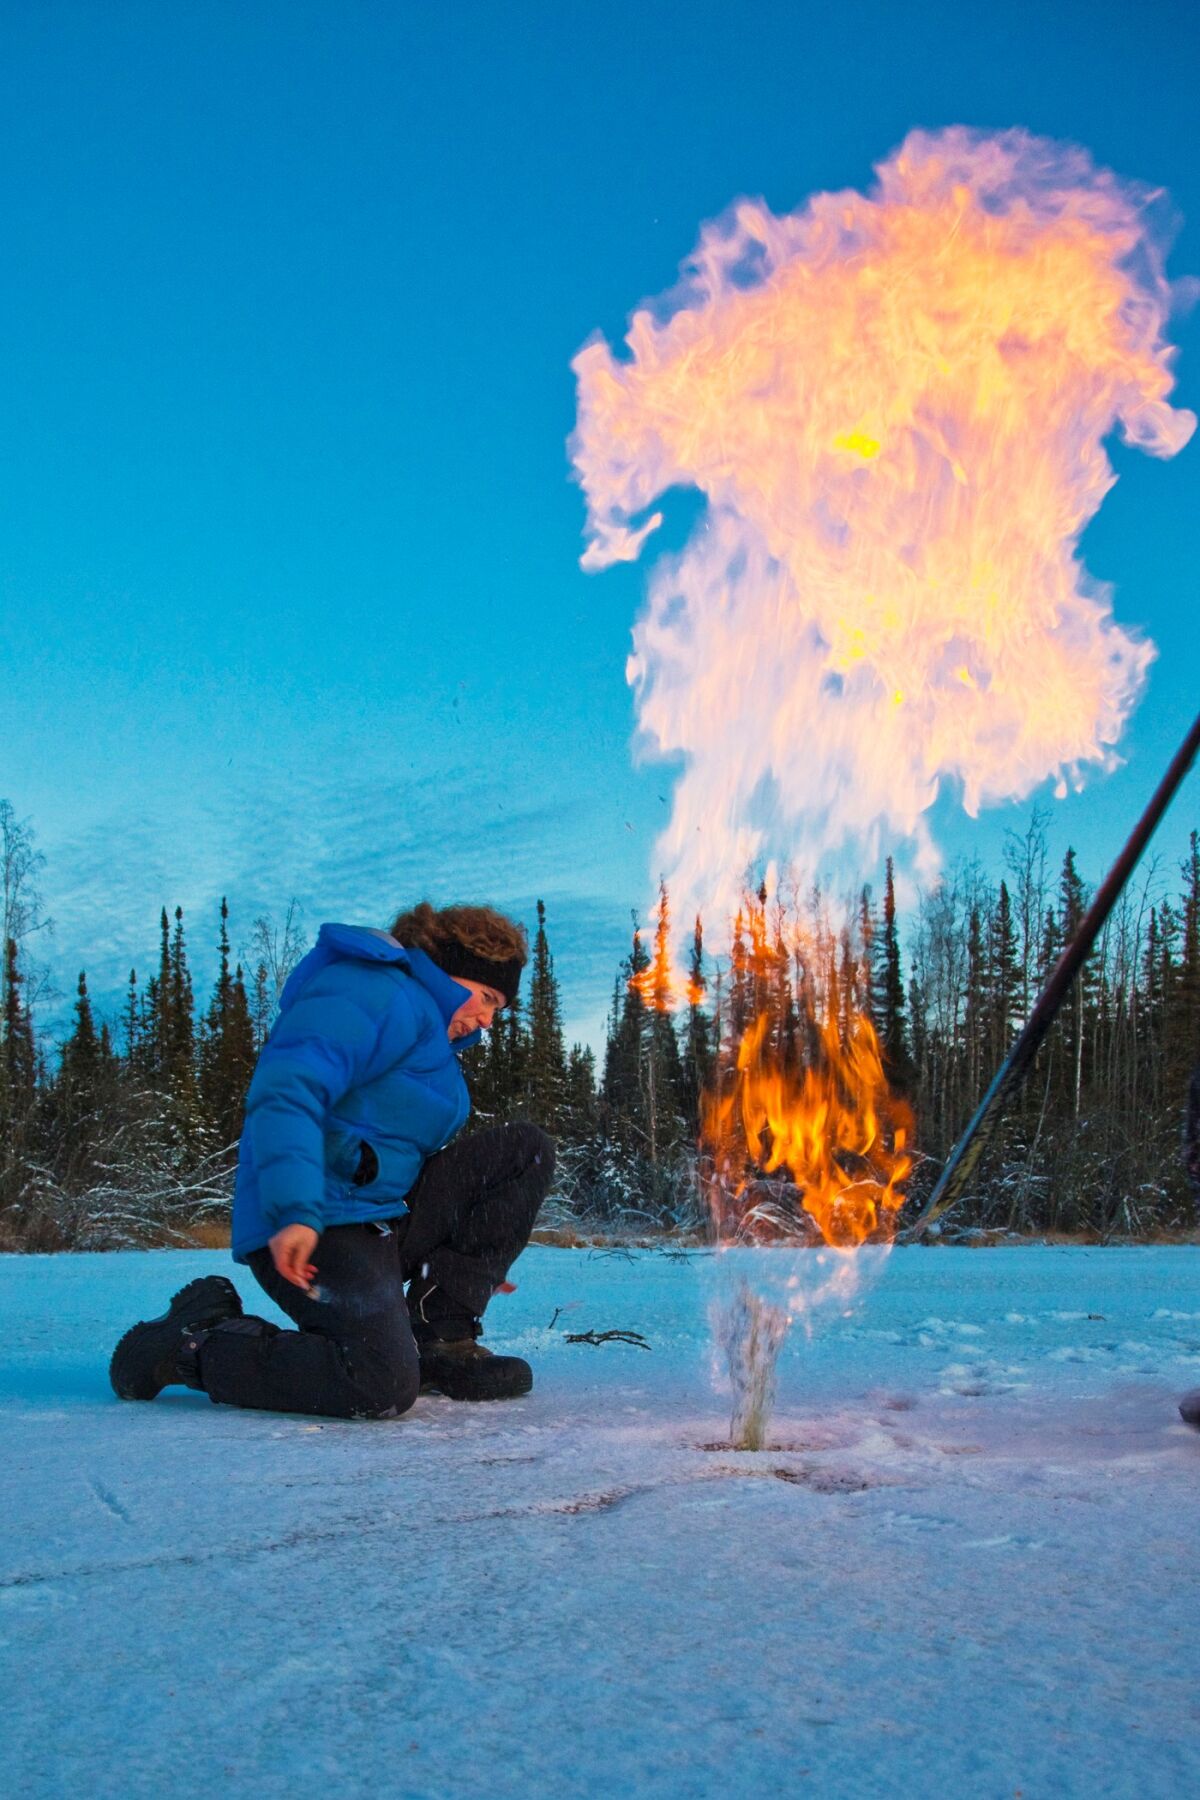 A woman kneels on a frozen lake with a plume of flame in front of her